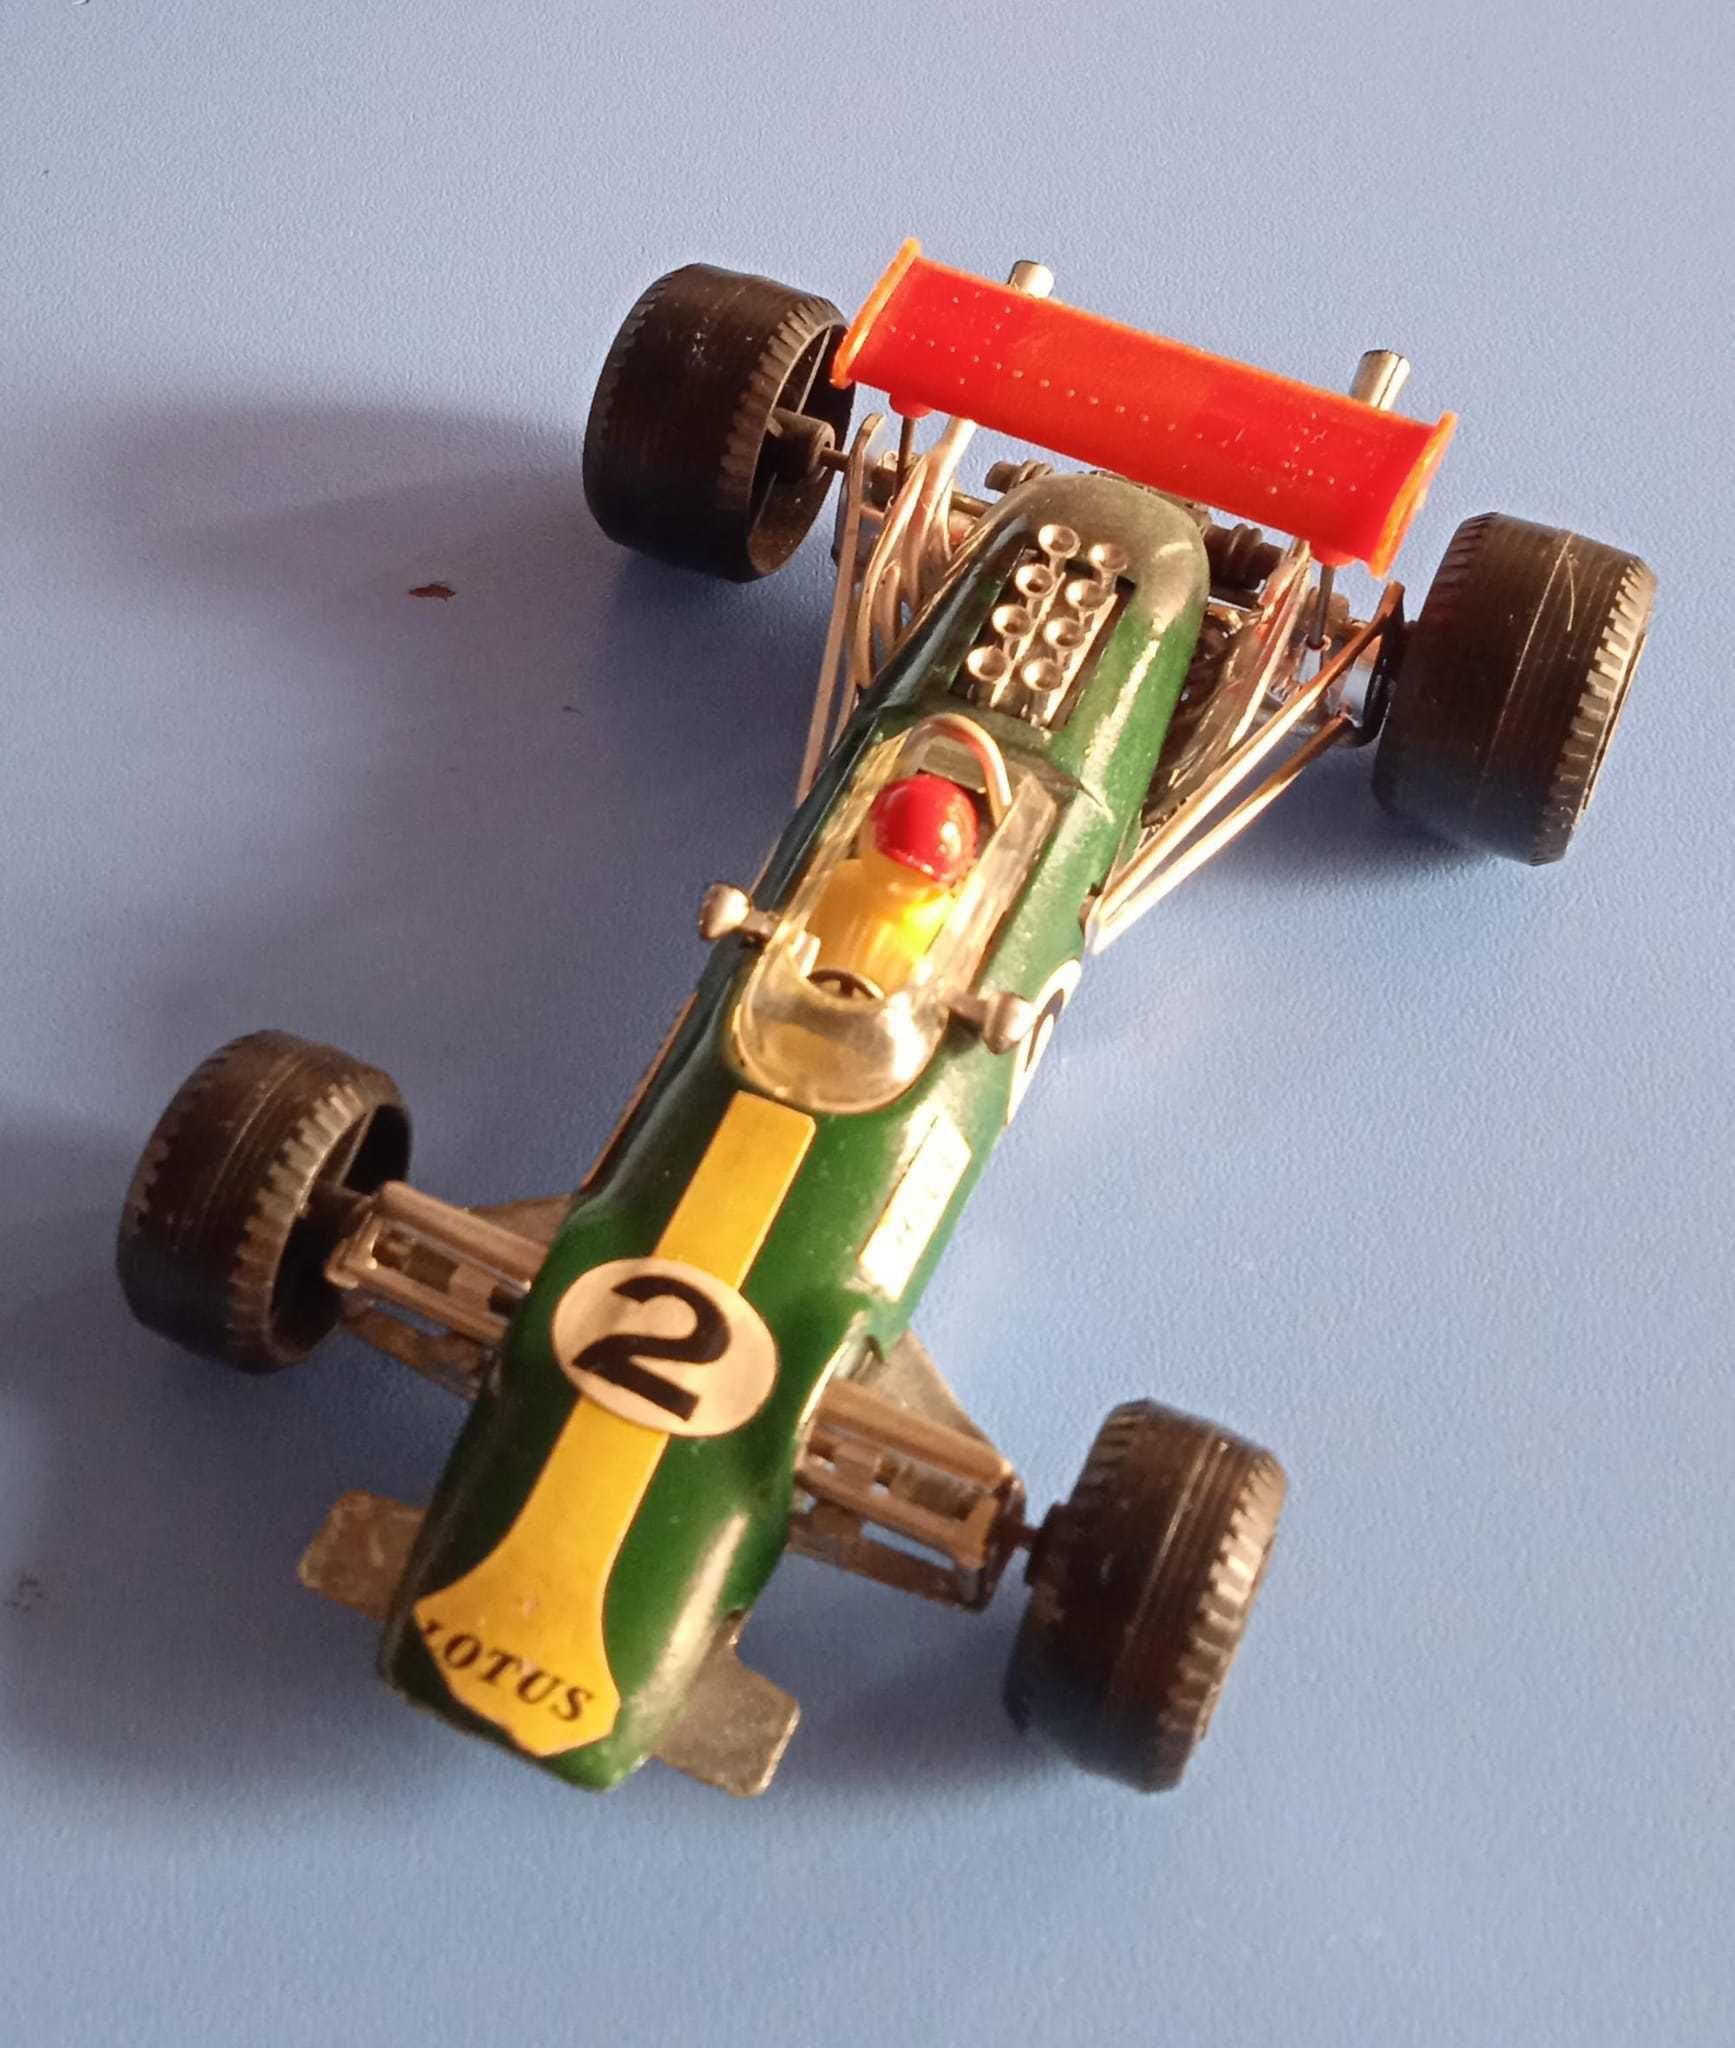 Masinuta colectie POLITOYS  Lotus Climax F1 (Stirling Moss)